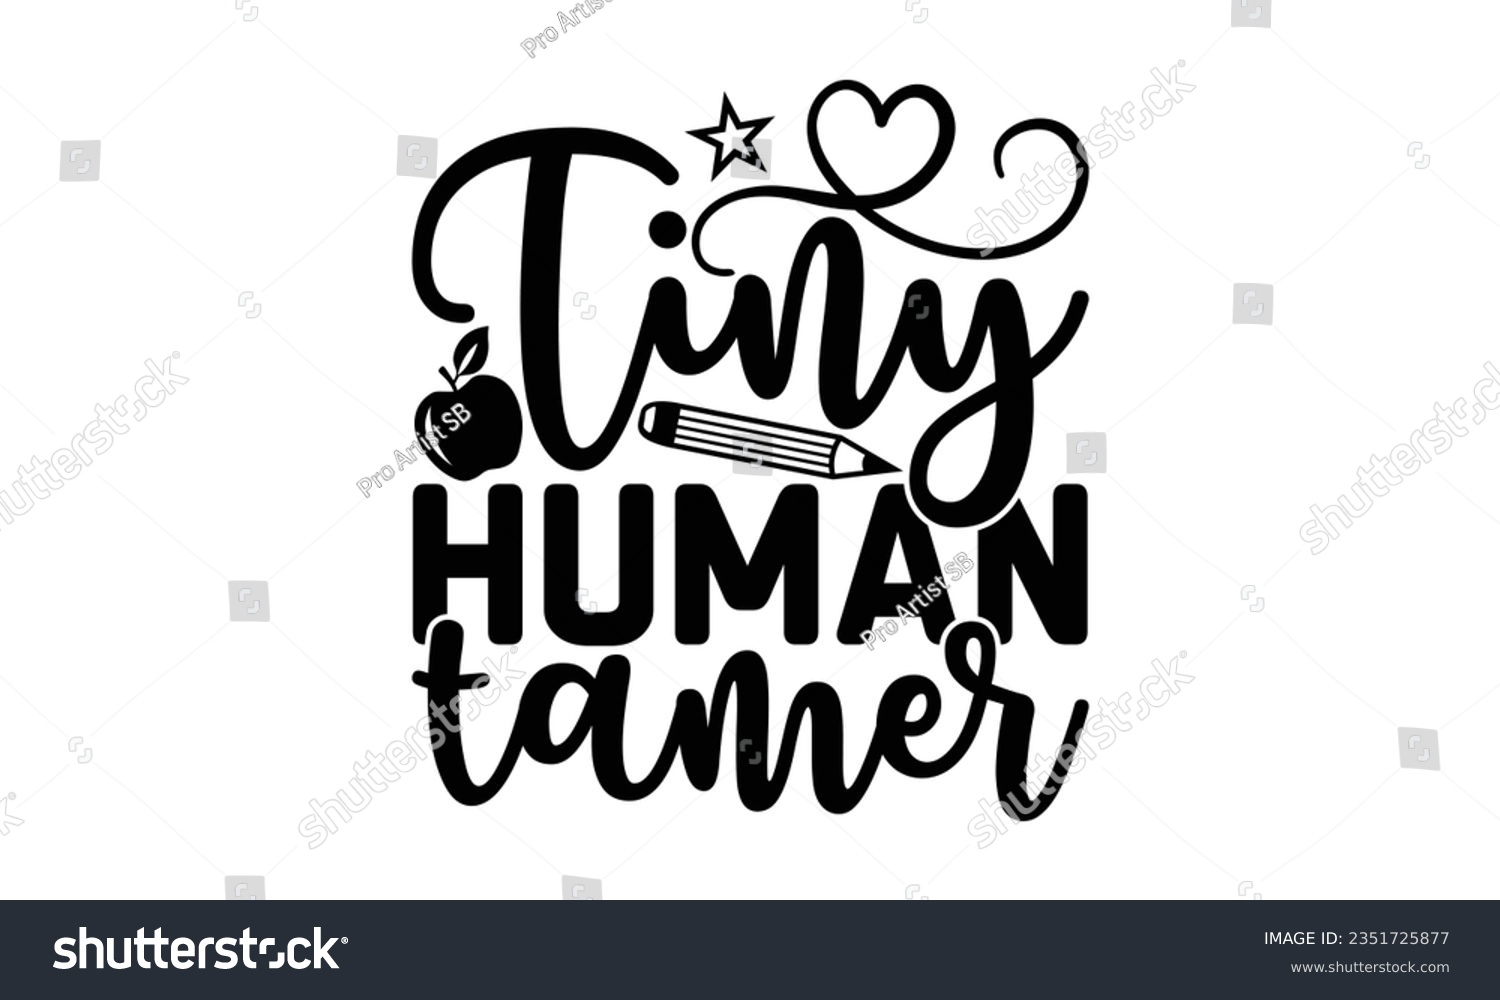 SVG of Tiny human tamer - Teacher SVG Design, Blessed Teacher Quotes, Calligraphy Graphic Design, Typography Poster with Old Style Camera and Quote. svg